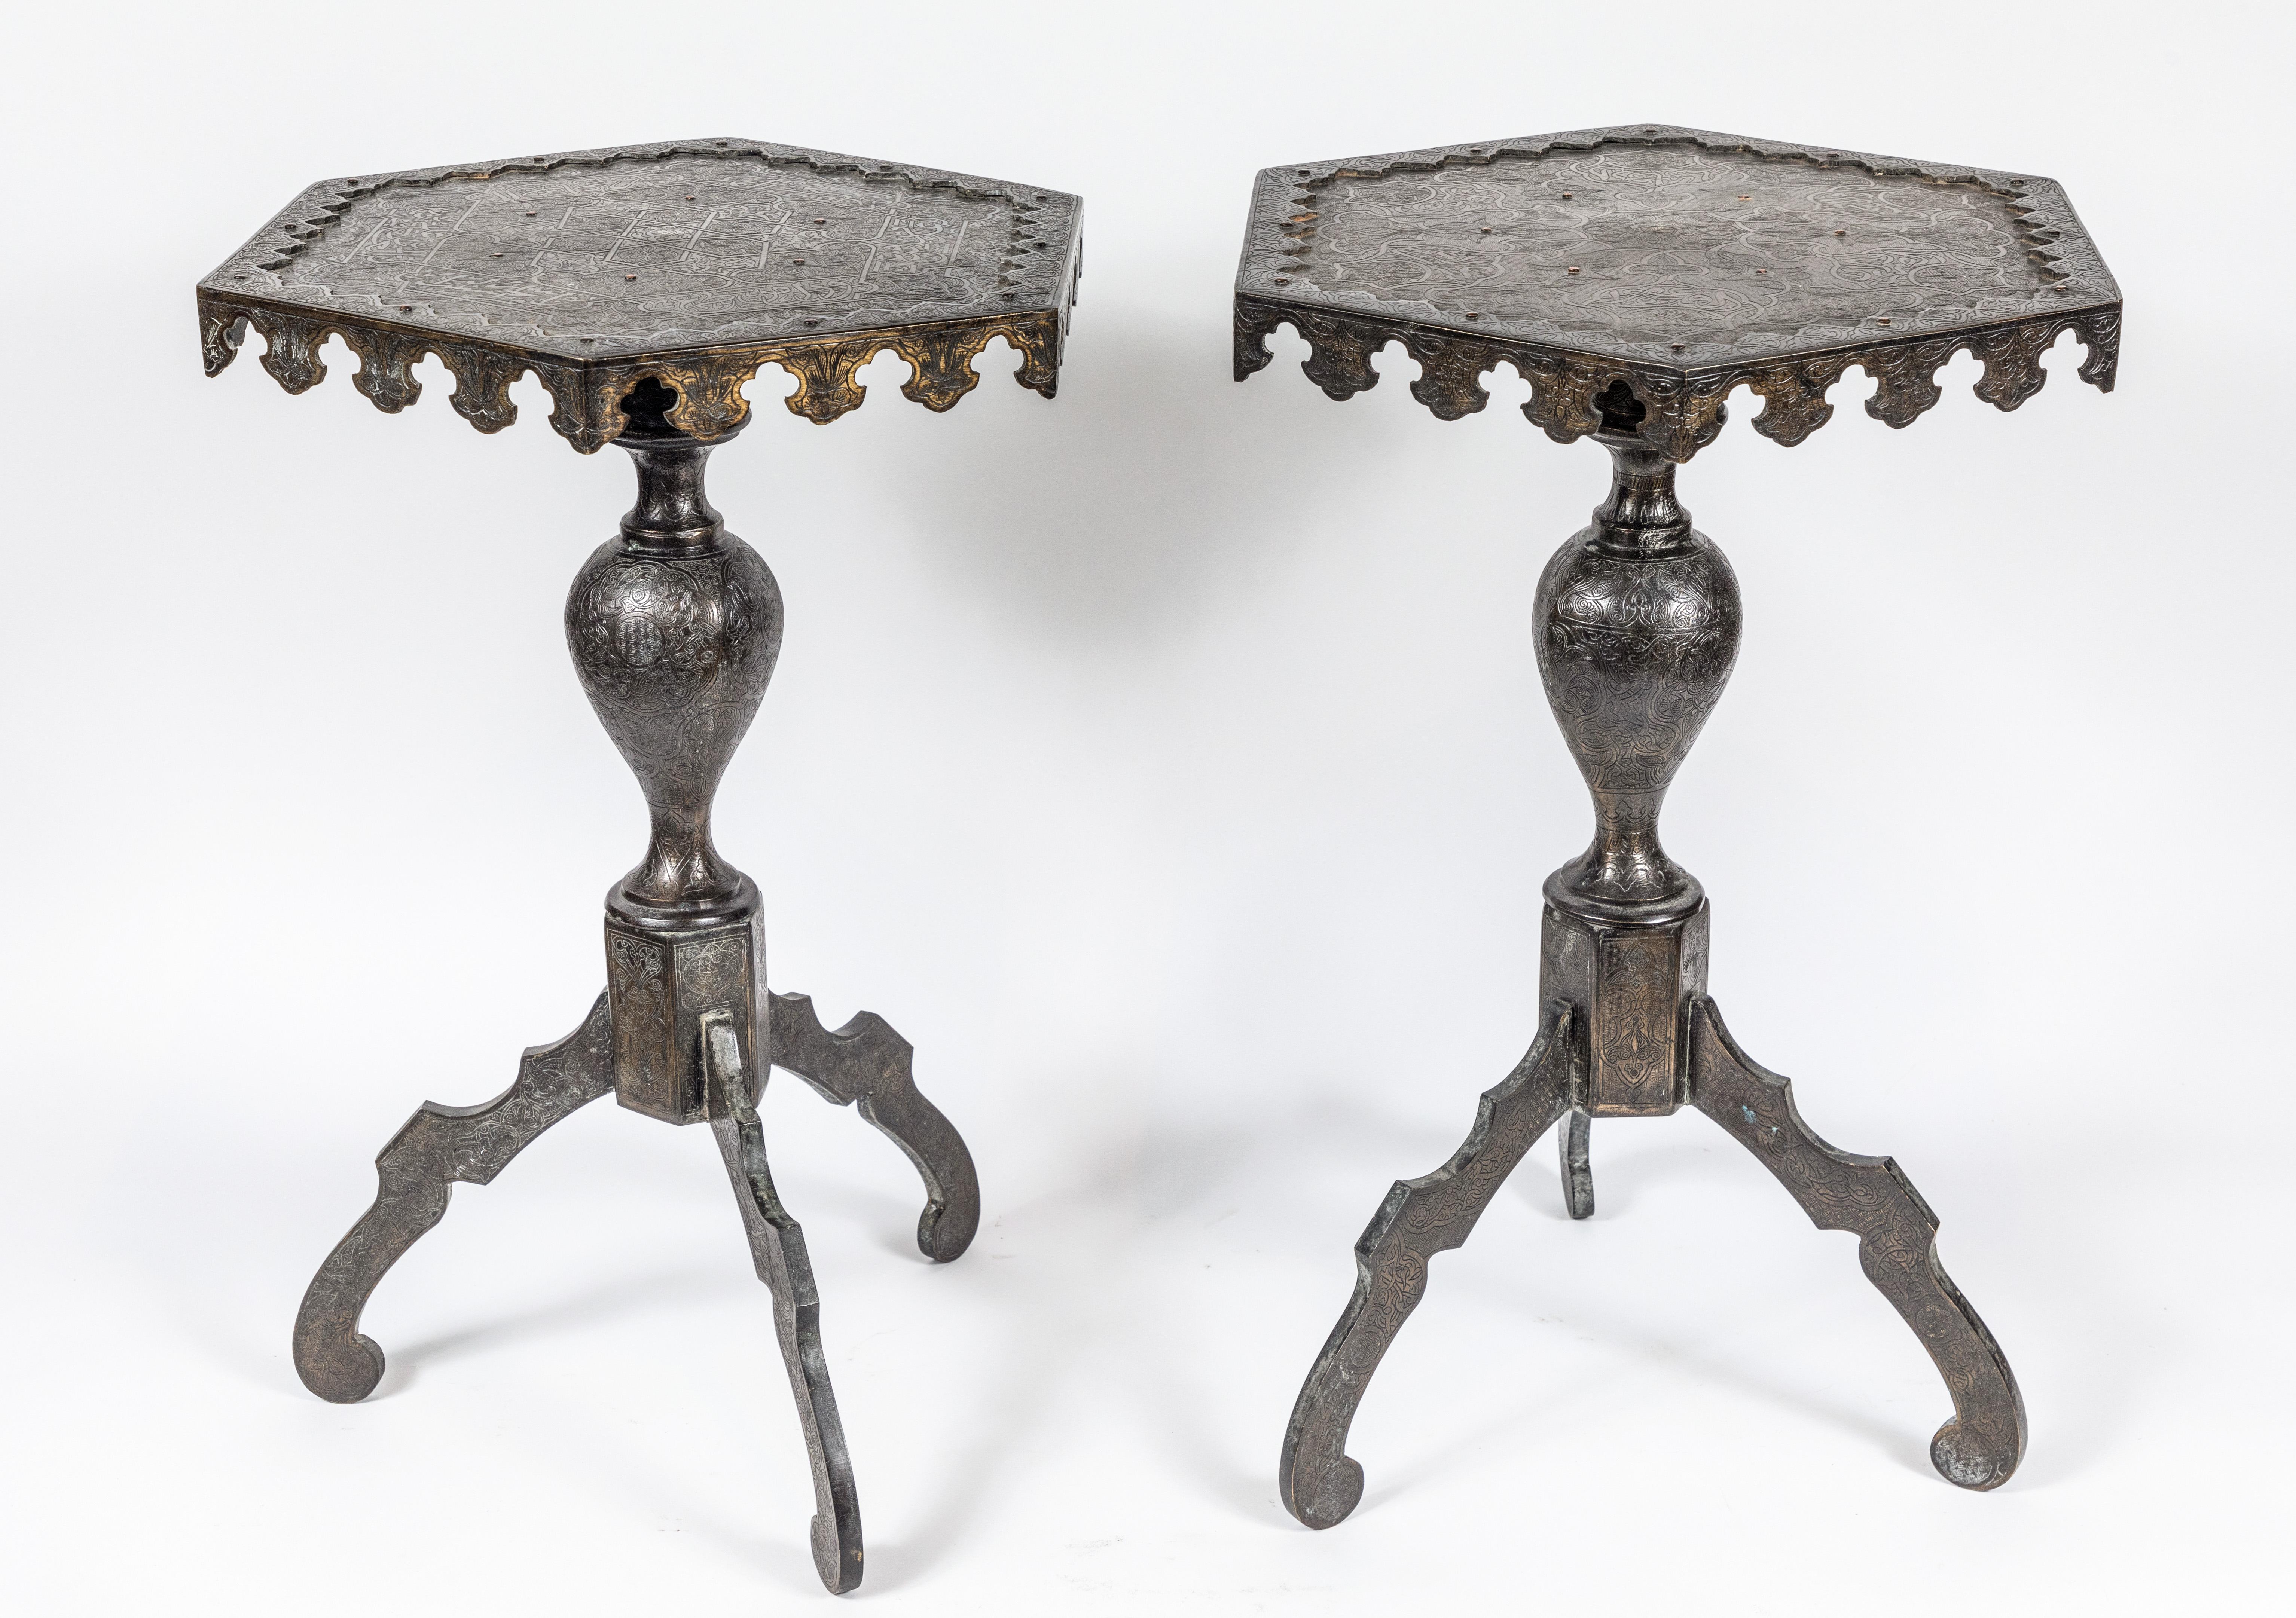 Unusual pair of cast bronze, tripod-based, pedestal tables, elaborately incised throughout with foliate details and Arabic writing. The top surrounded by raised edges terminating in a modified, scalloped border.